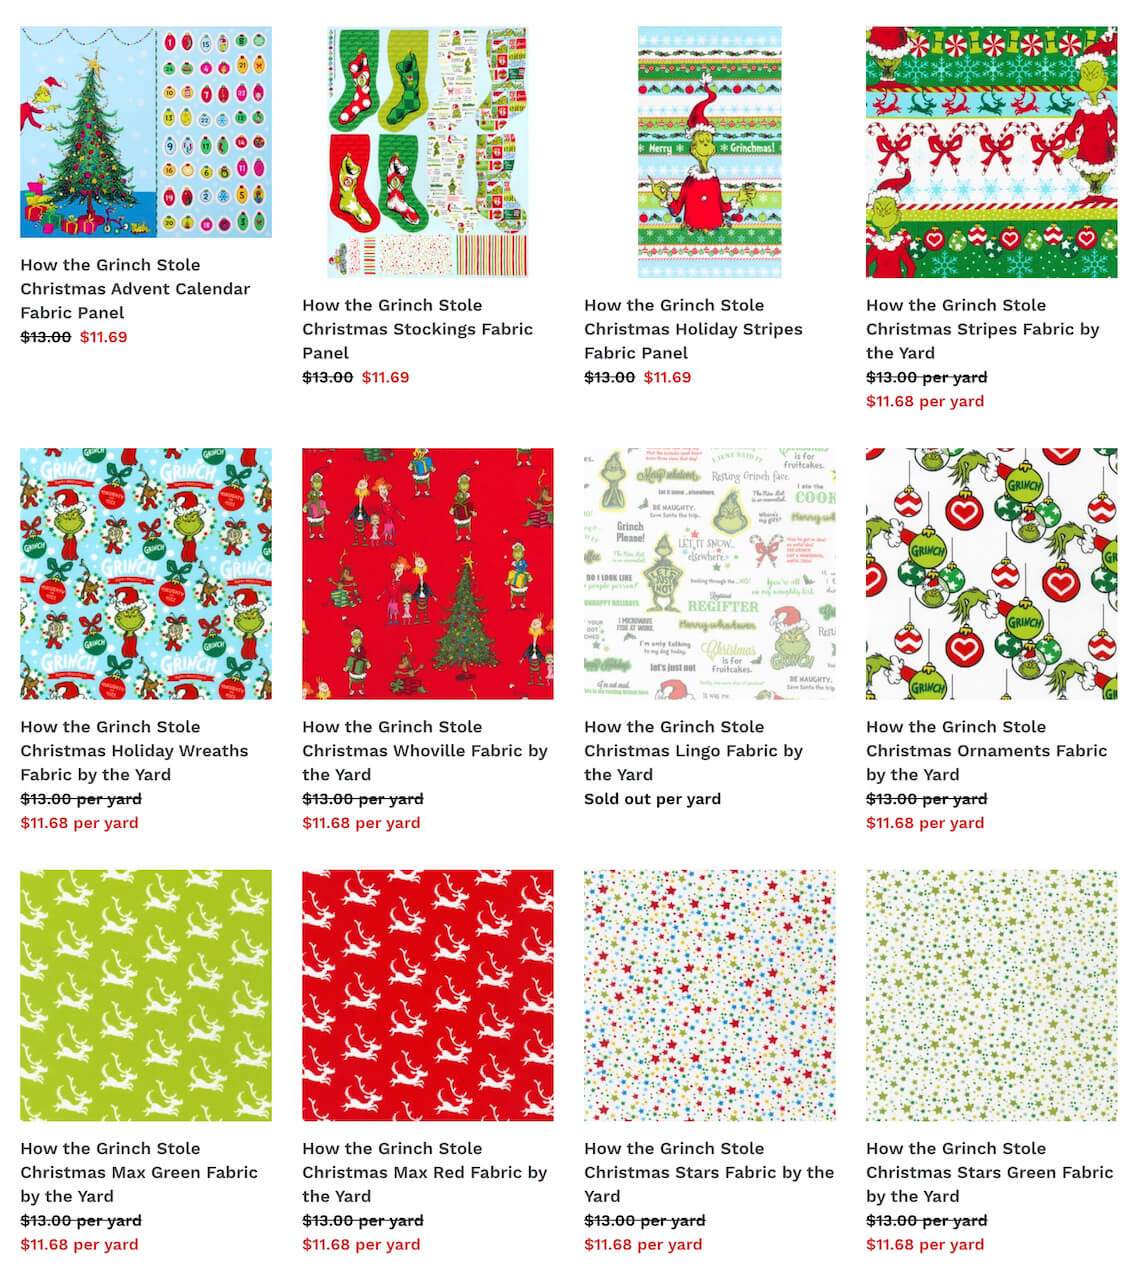 Buy How the Grinch Stole Christmas Fabrics at Nancy Zieman Productions at ShopNZP.com